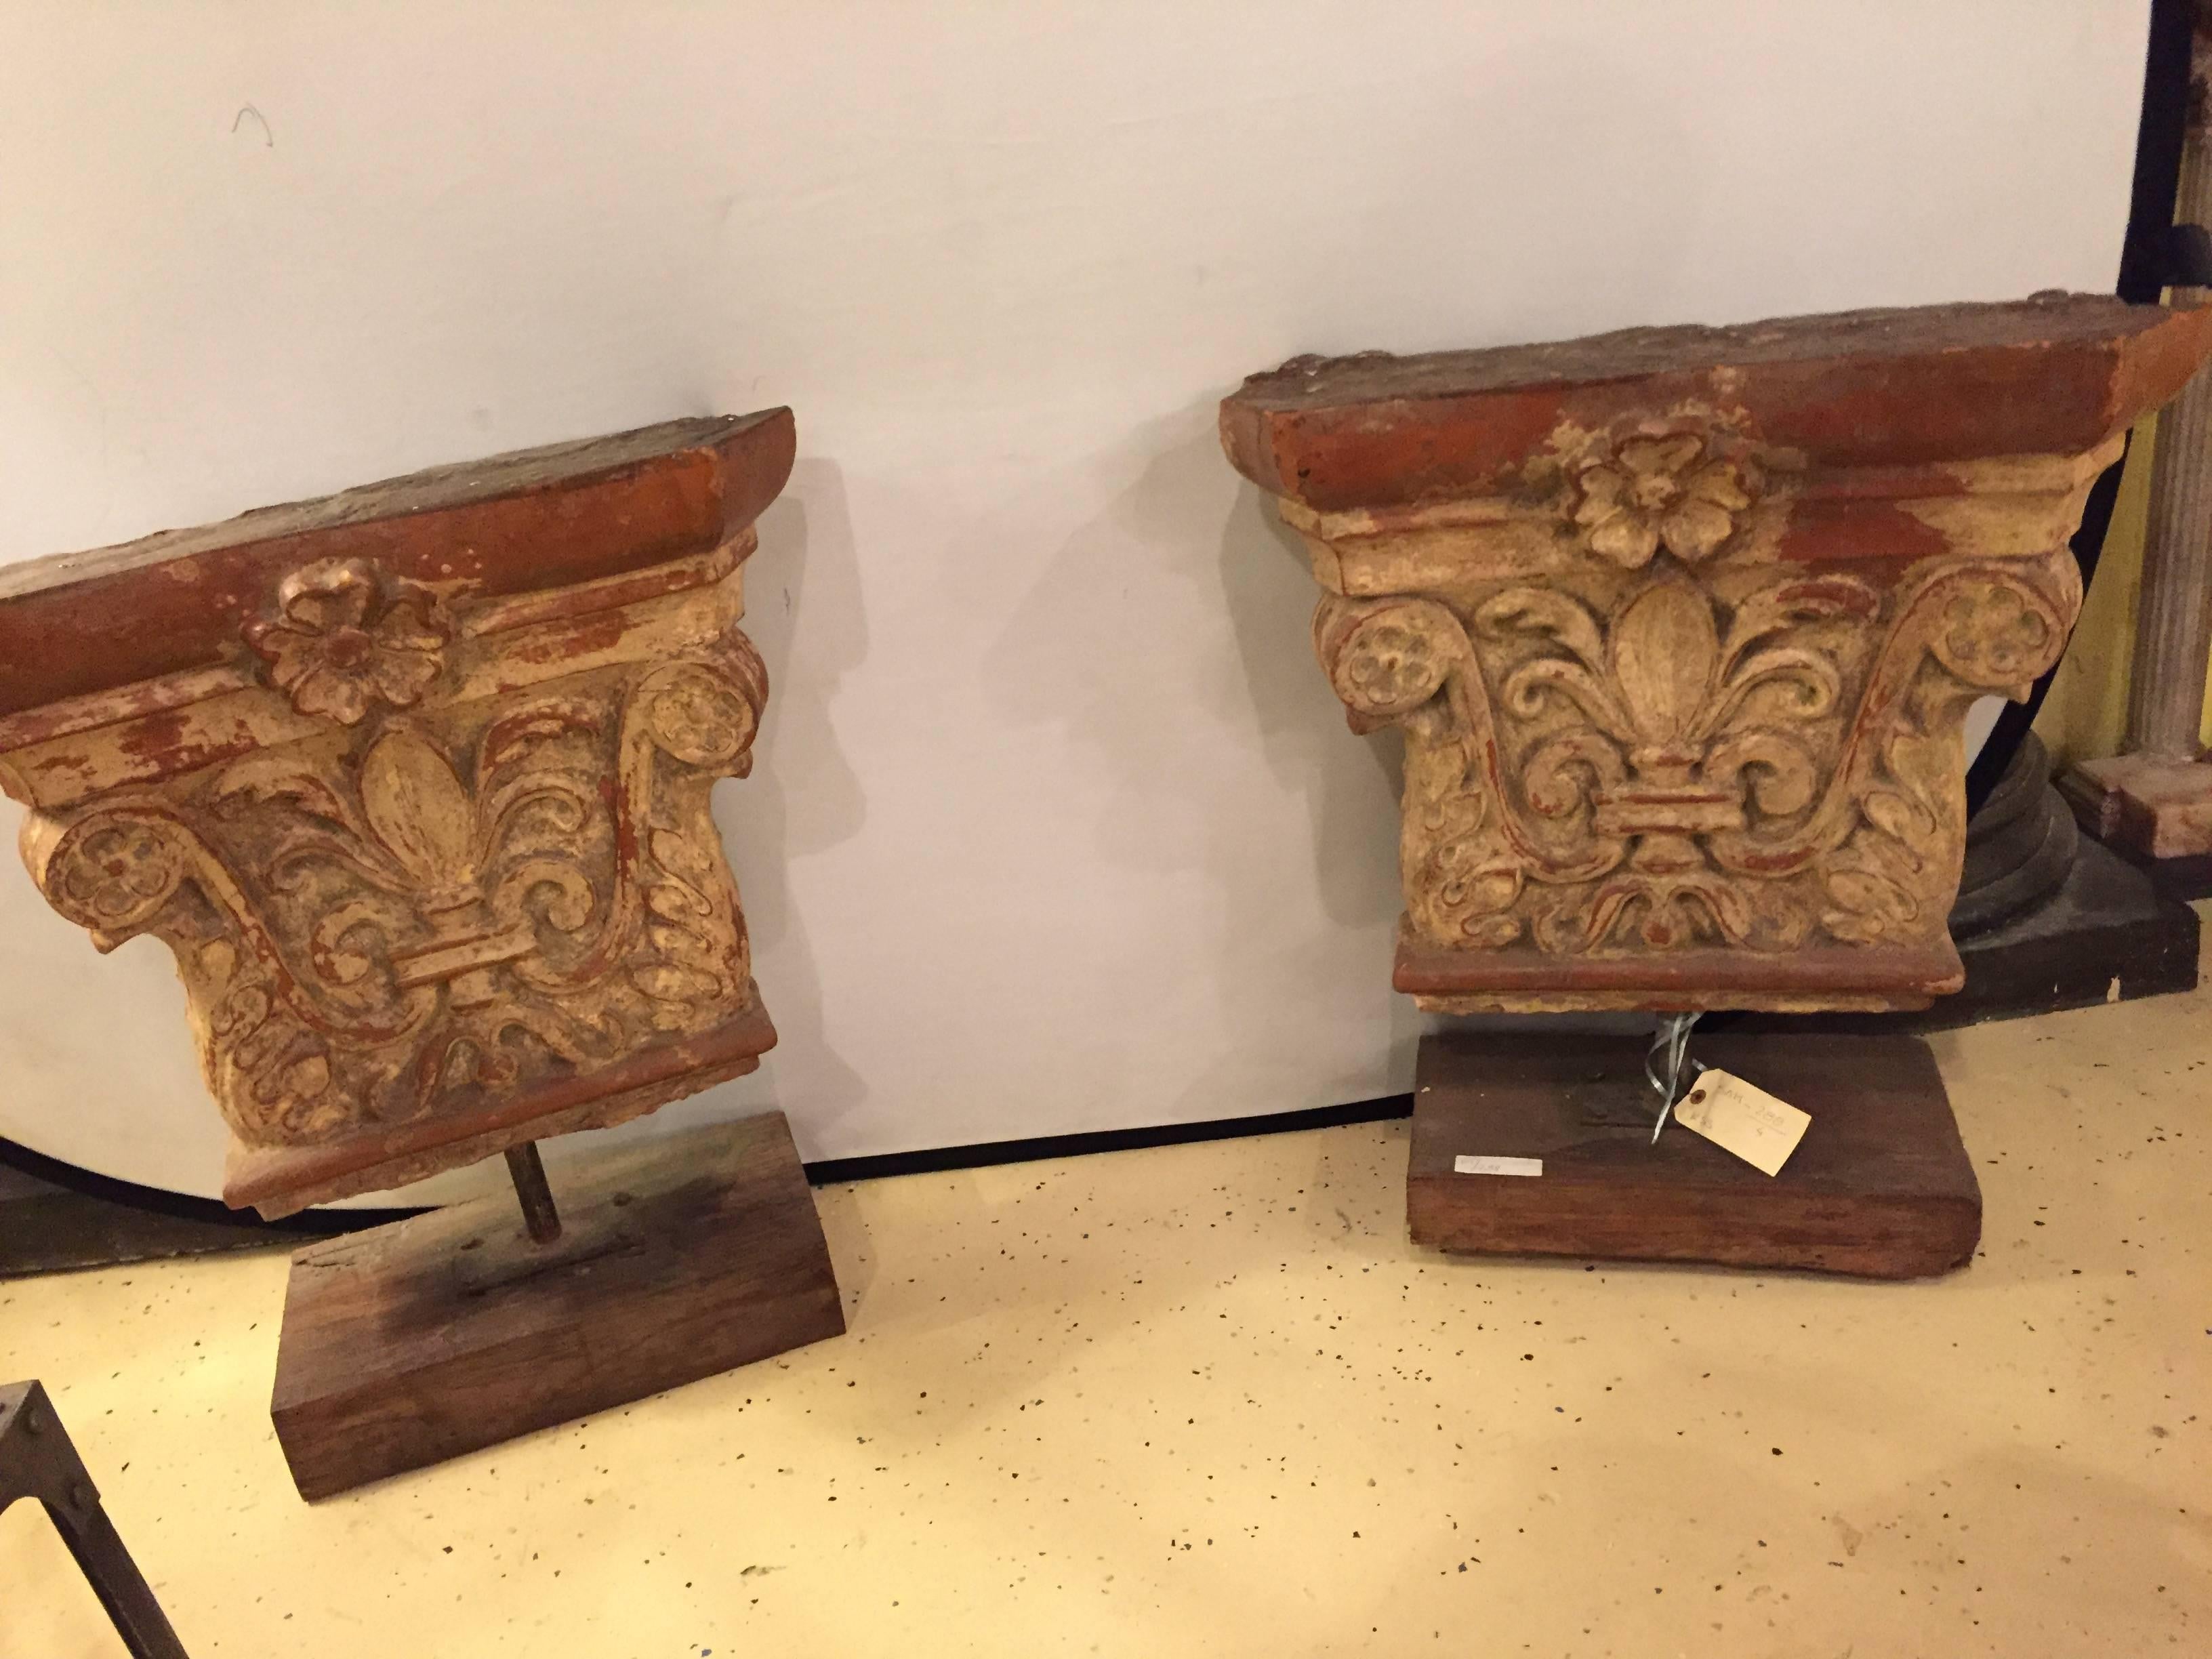 A pair of antique architectural stone building tiles mounted on stands. Each solid wooden pedestal used to mount this ancient fleur-de-lis decorated building tile. The pair can easily form a garden bench or console table as is needed.